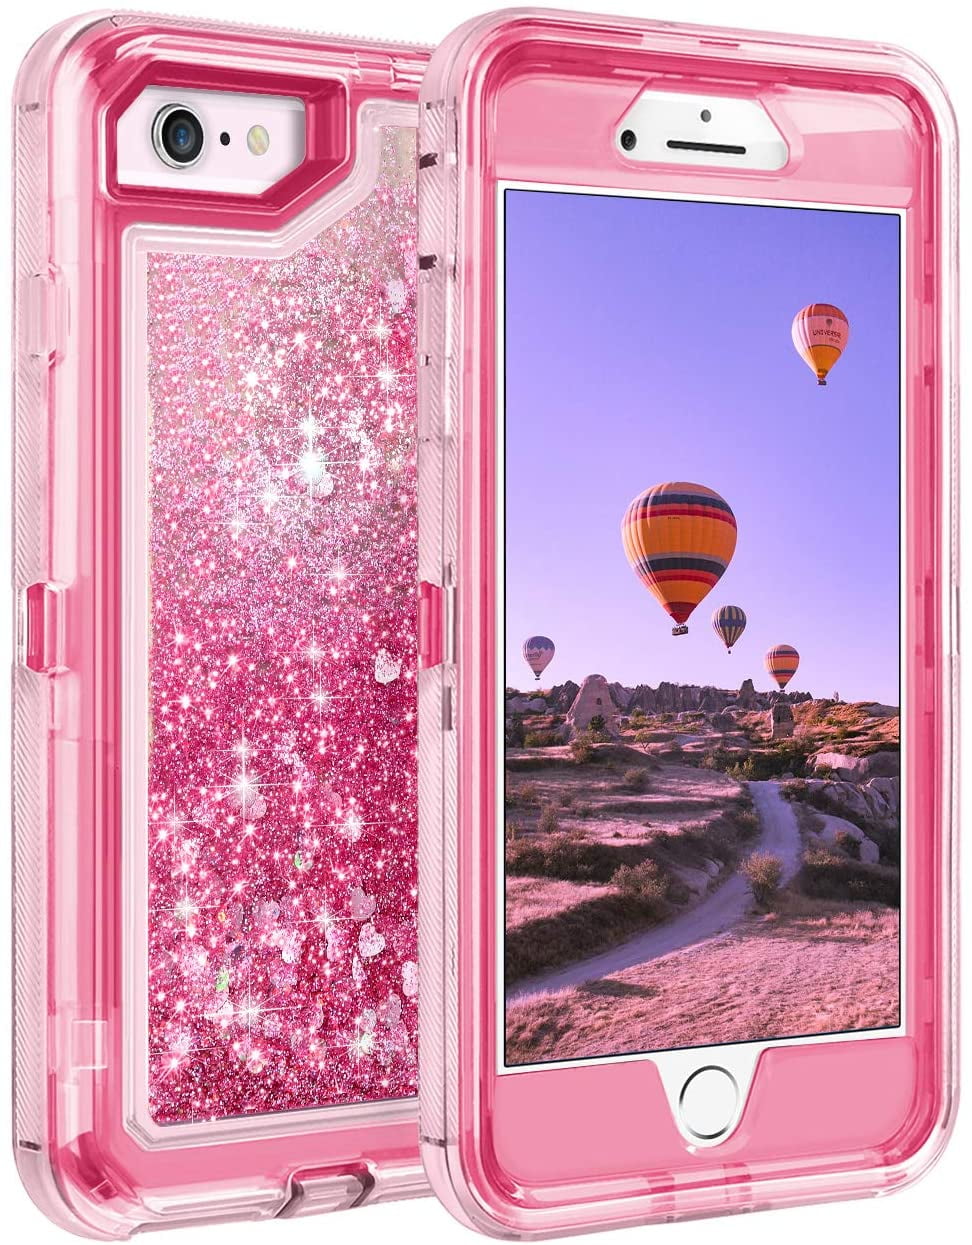 Entronix iPhone SE/8/7 Heavy Duty Case for Girls Women Liquid Bling Sparkle Shining Glitter Luxury Shockproof Quicksand TPU Cover for iPhone SE/8/7 4.7" Pink - Walmart.com